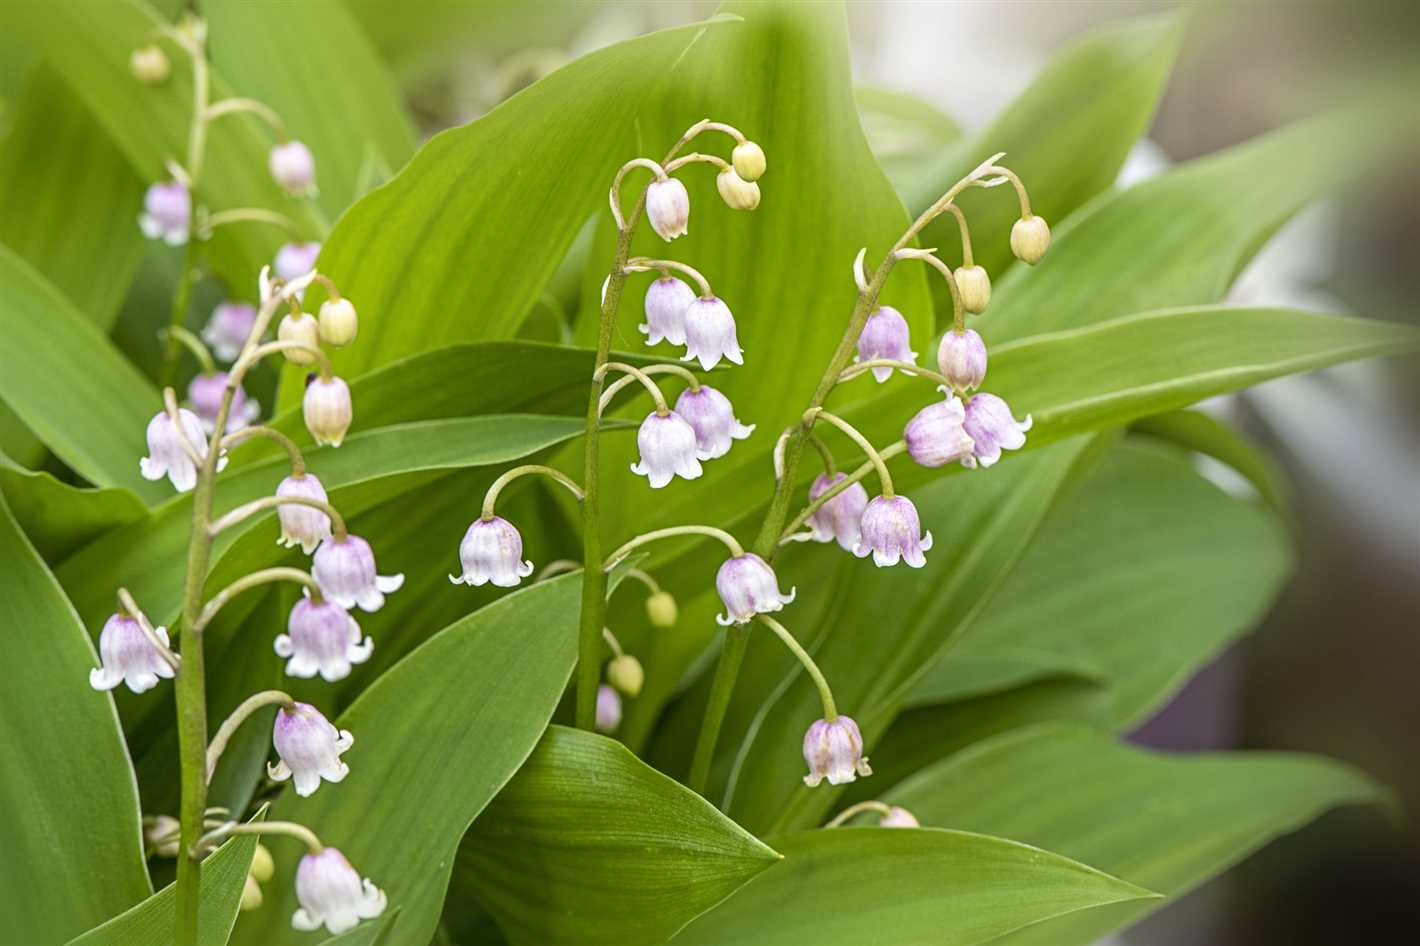 Growing Lily of the Valley